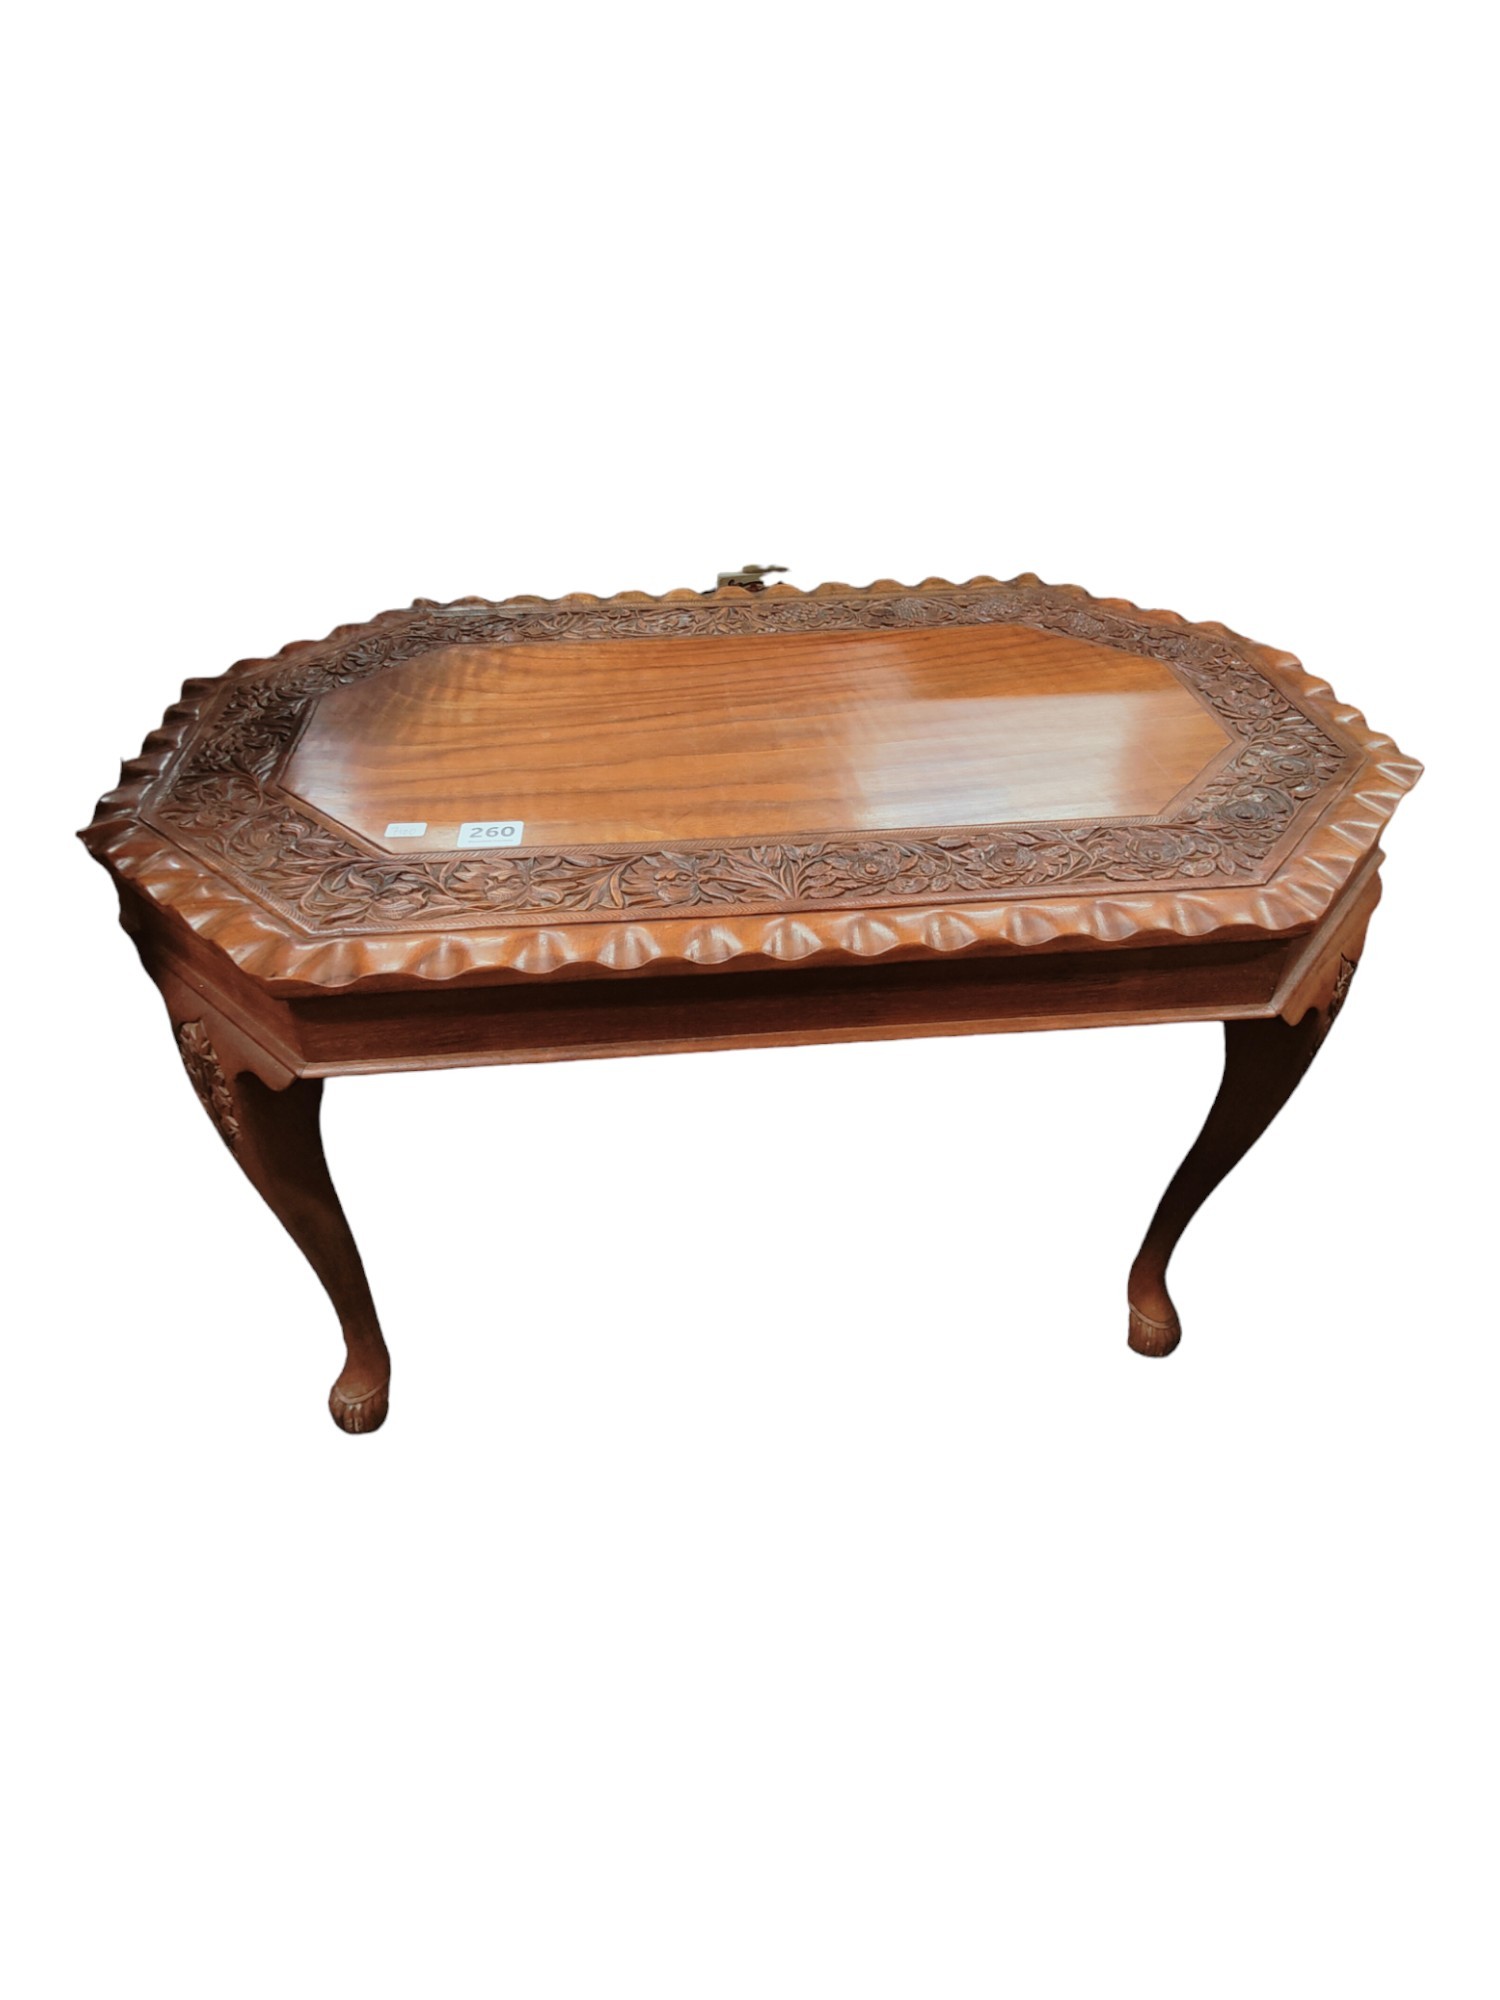 CARVED MAHOGANY COFFEE TABLE